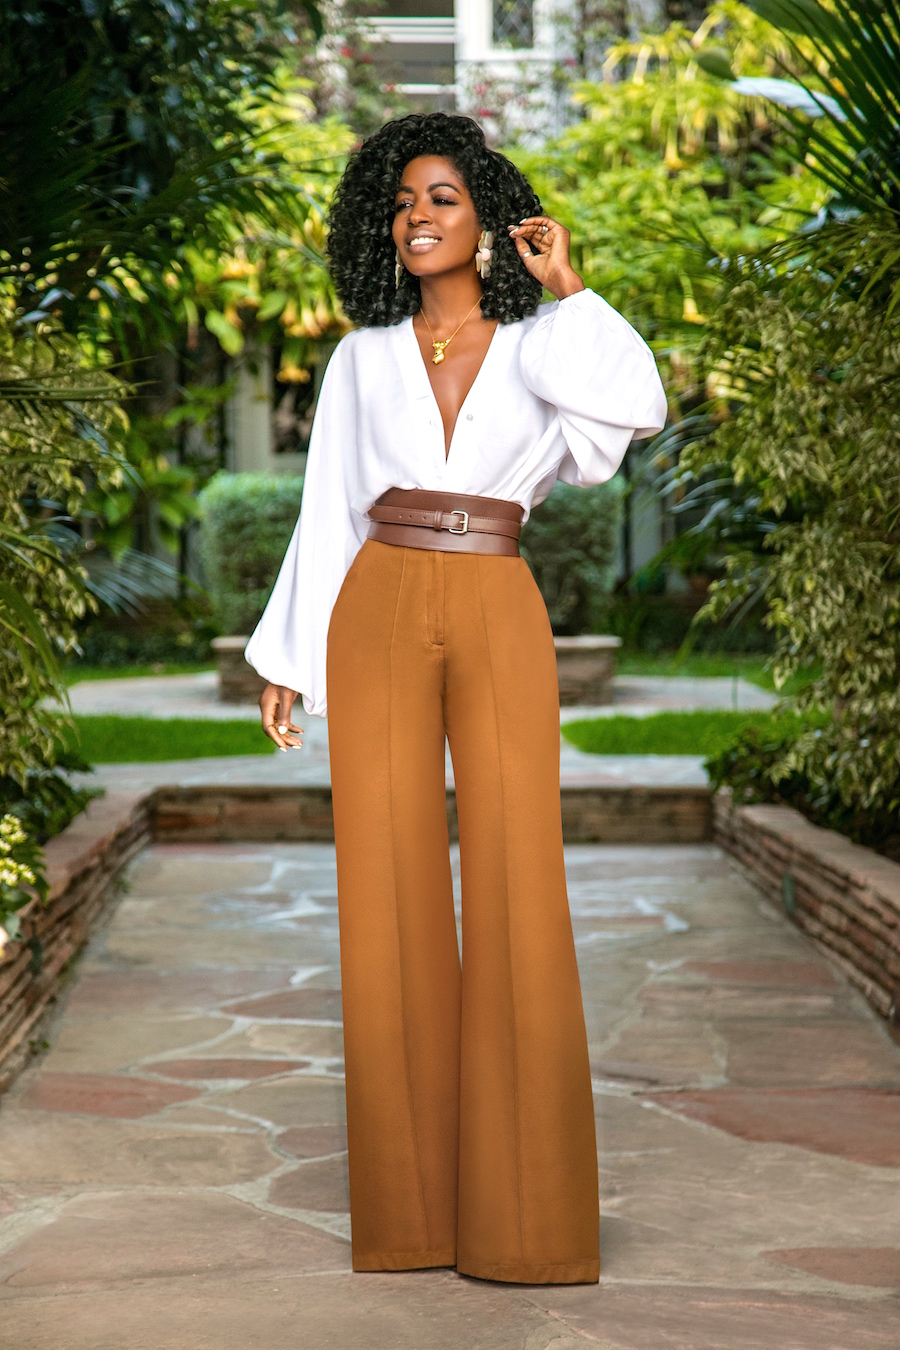 Draped Bodysuit + Belted High Waist Pants (Style Pantry)